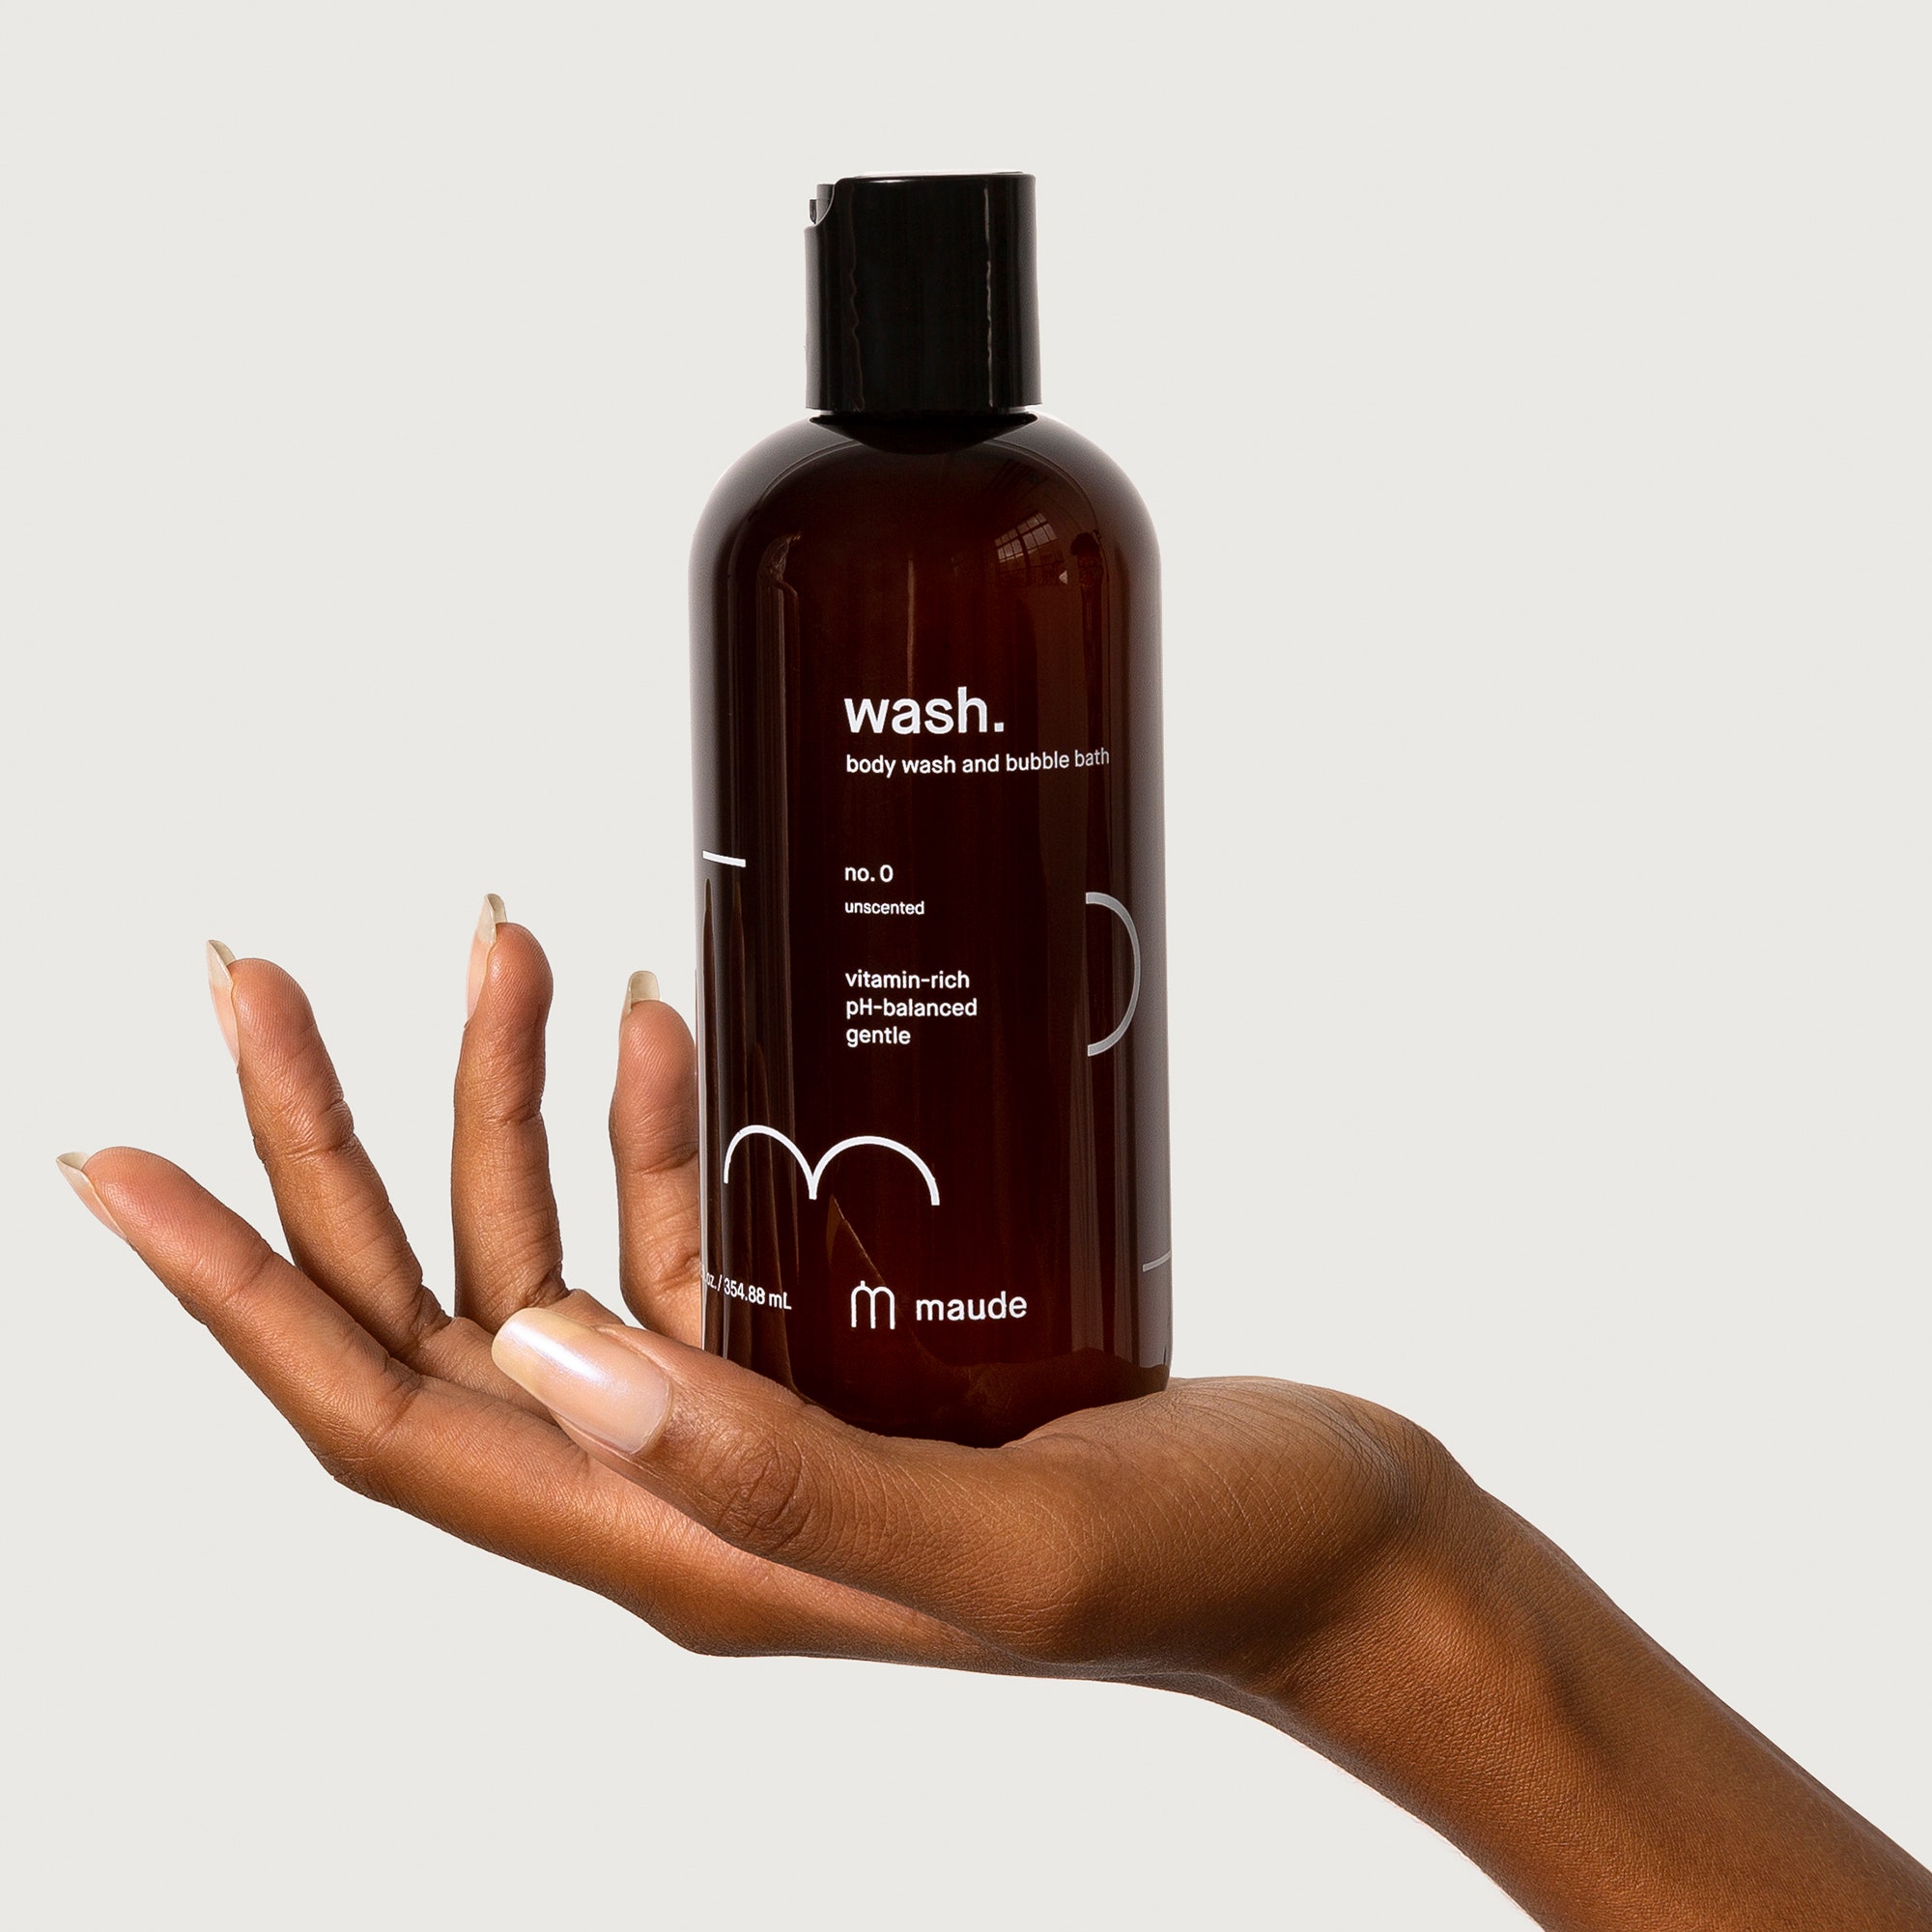 Maude Launches a Daily Body Wash and Bubble Bath, Wash No. 0, For All Skin Types